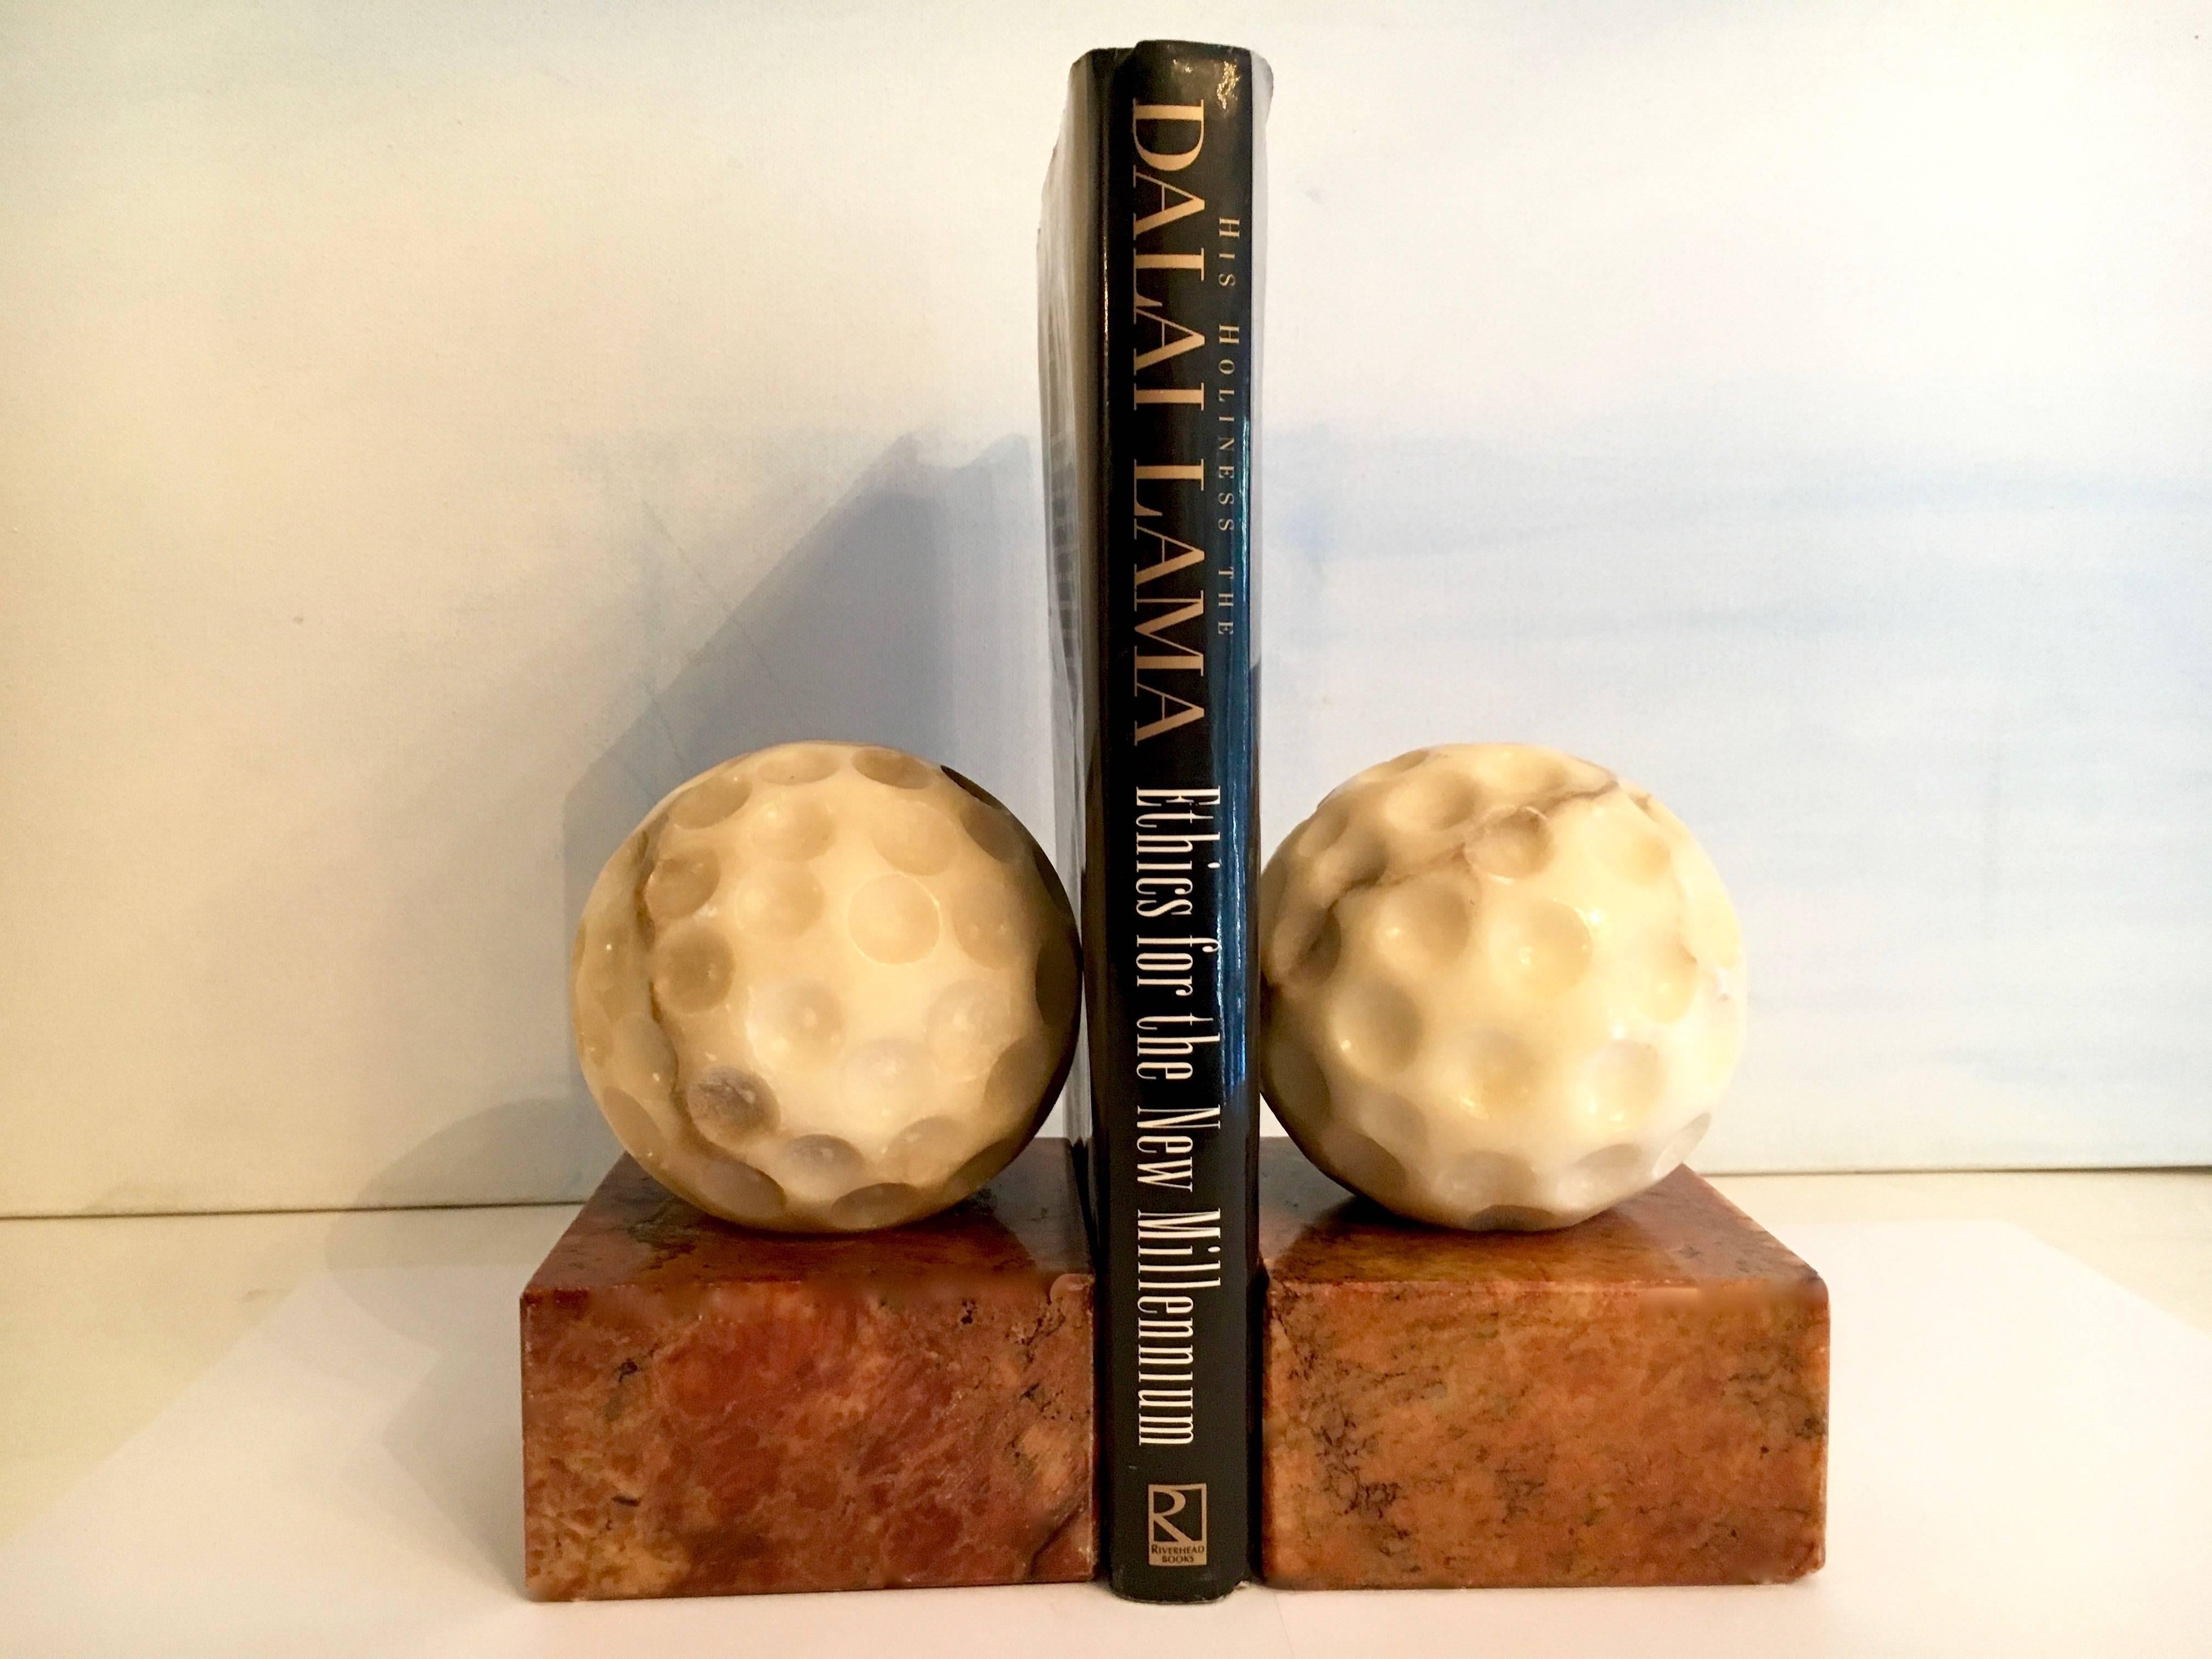 A great pair of vintage marble golf ball bookends with red marble bases a sure hole in one for the avid golfer - a perfect compliment to their desk, book shelf or the golf section of your library!   FATHERS DAY OR BOSSES DAY!

